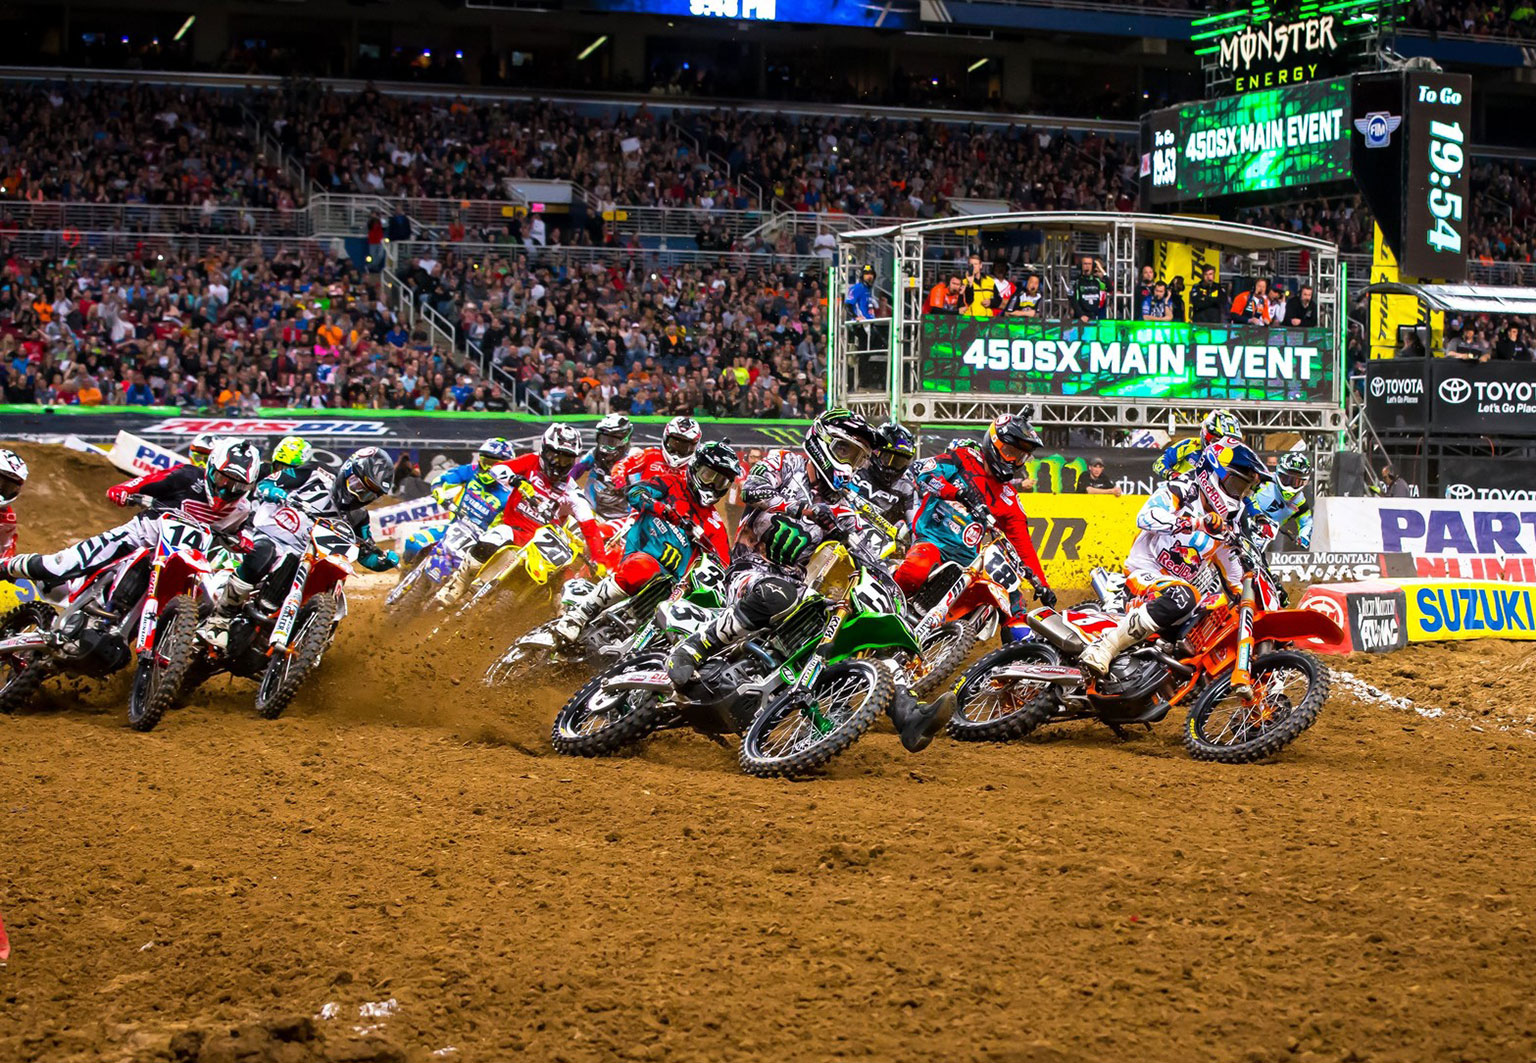 Video highlights from St. Louis Supercross MotoHead